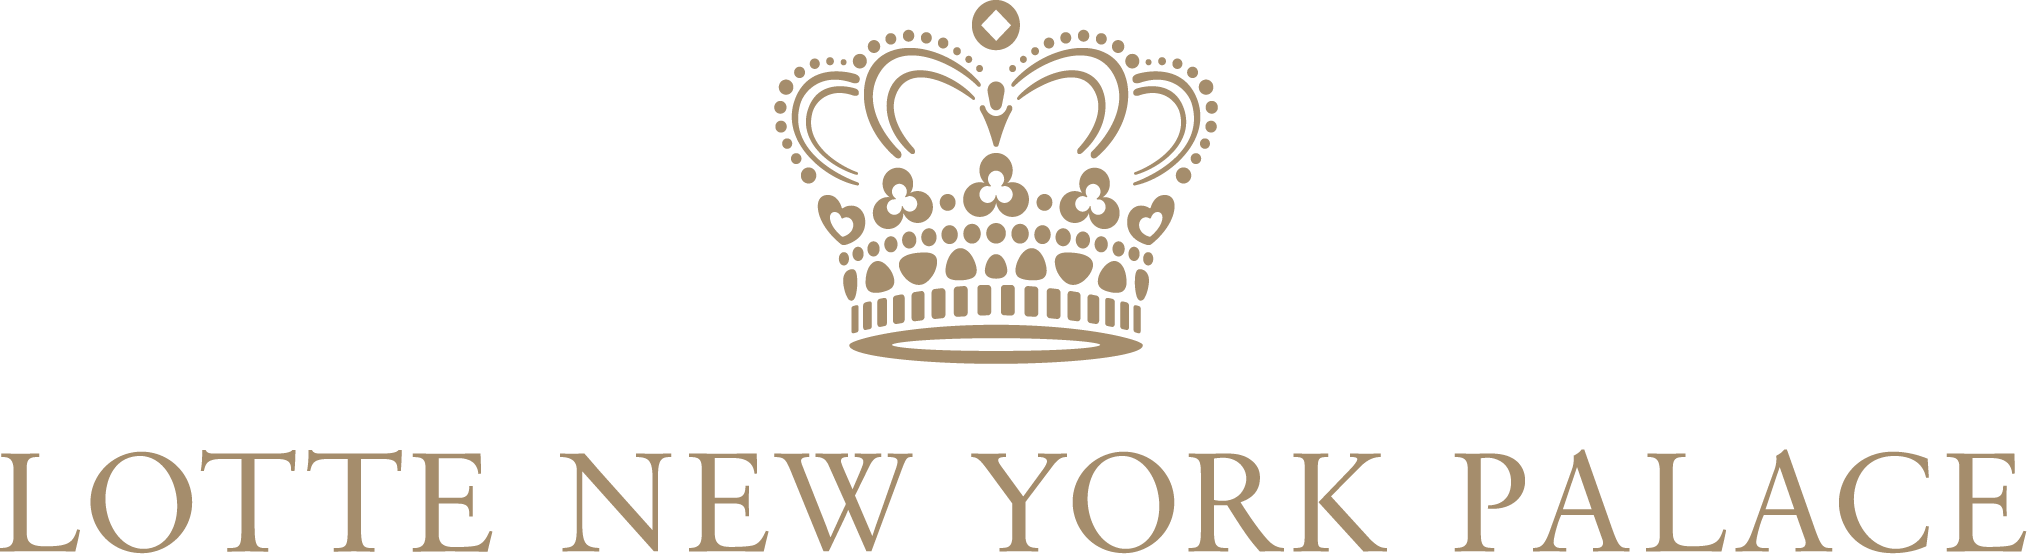 the new york palace